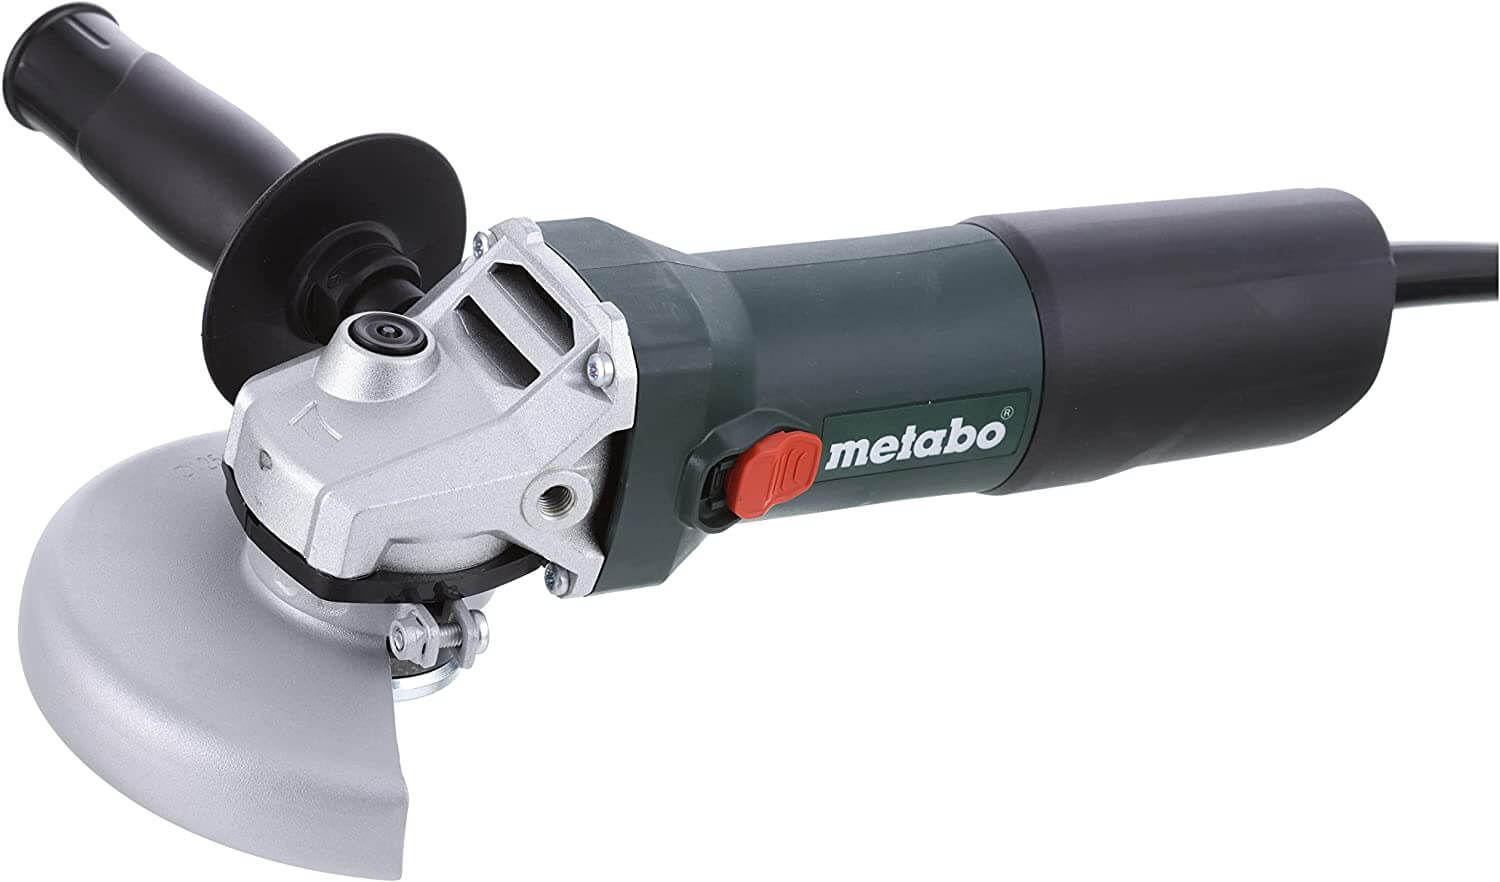 3. Metabo W 850-125